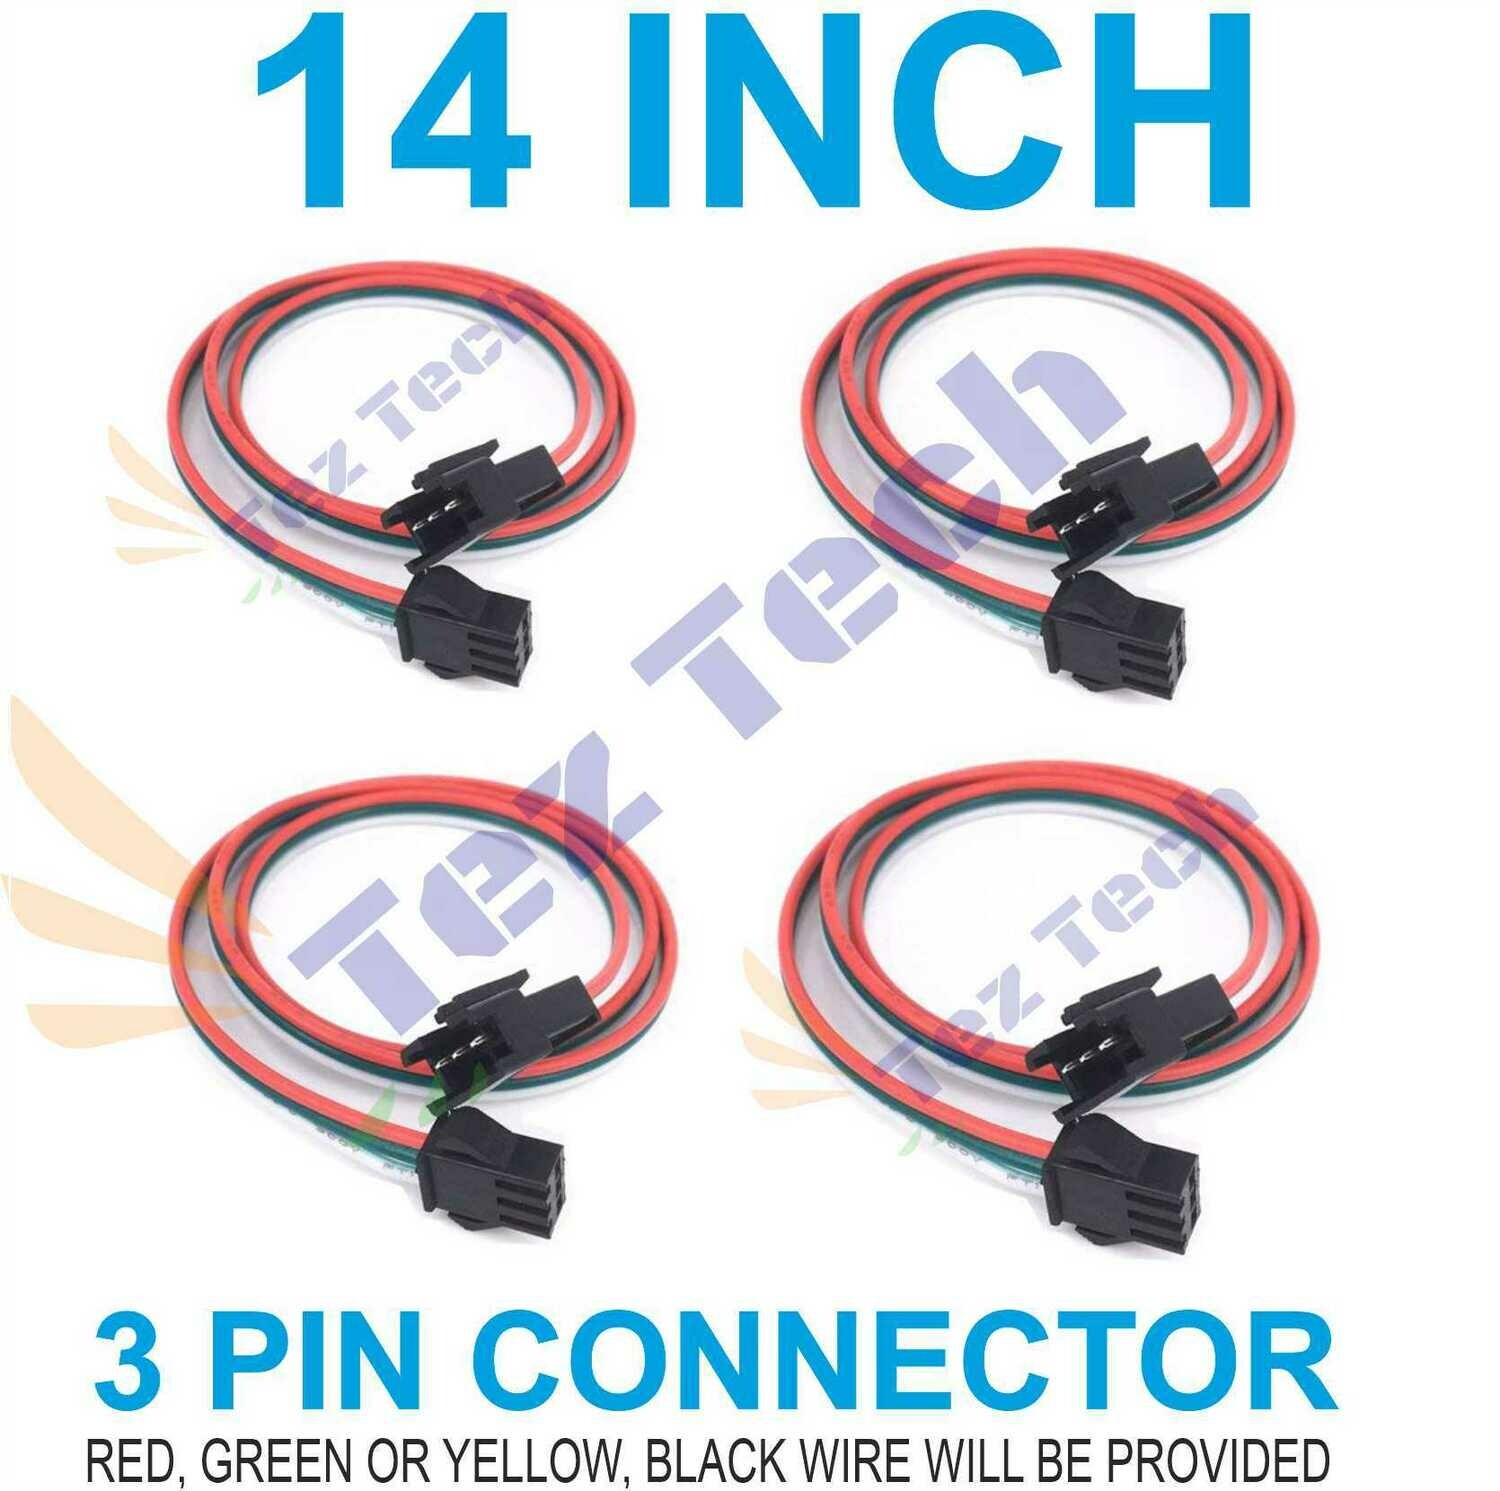 (RMCNN51) 14 INCH MALE-FEMALE 3 PIN CONNECTOR